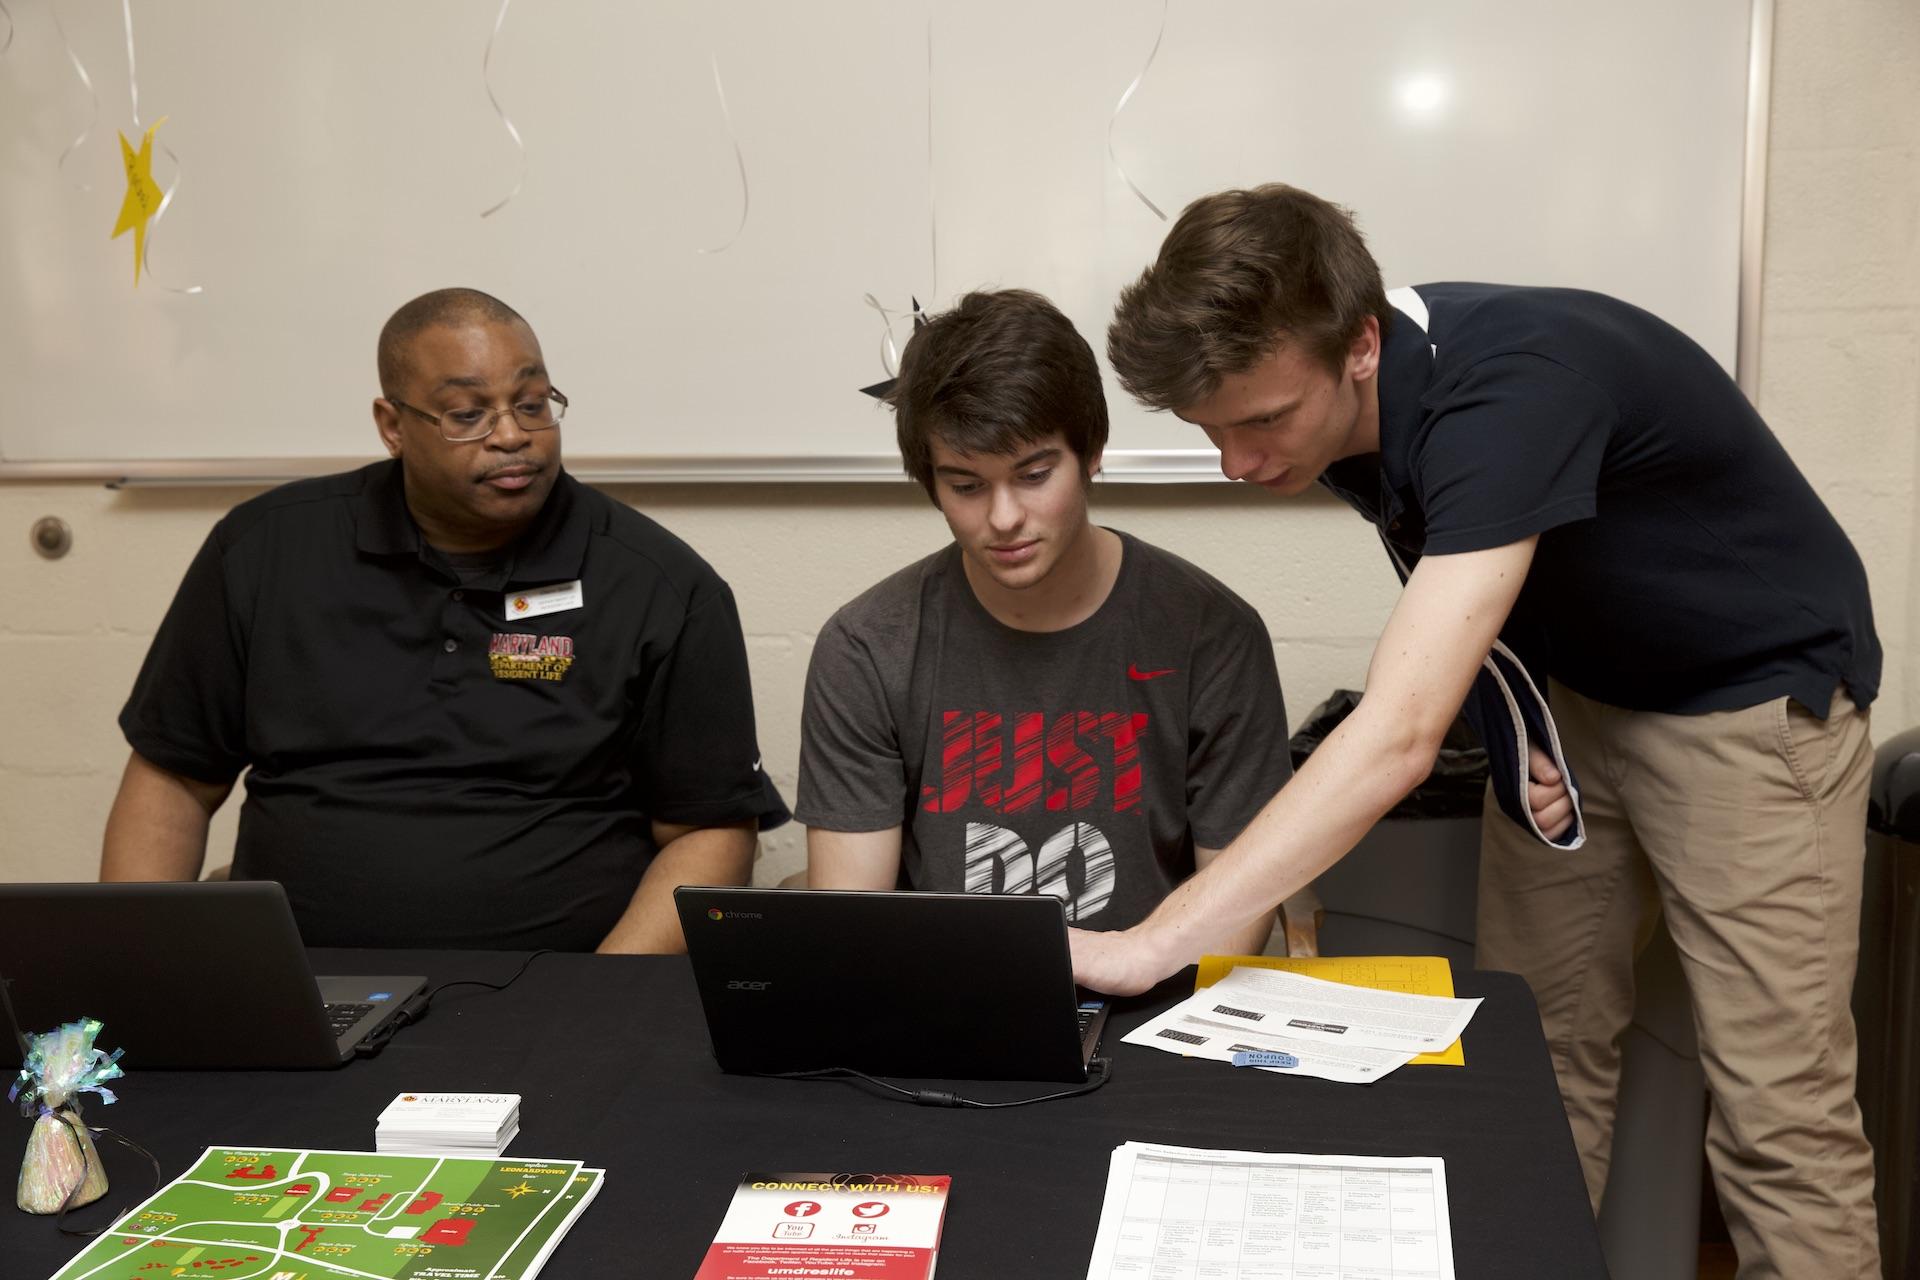 two staff members helping a student on a laptop at an information booth